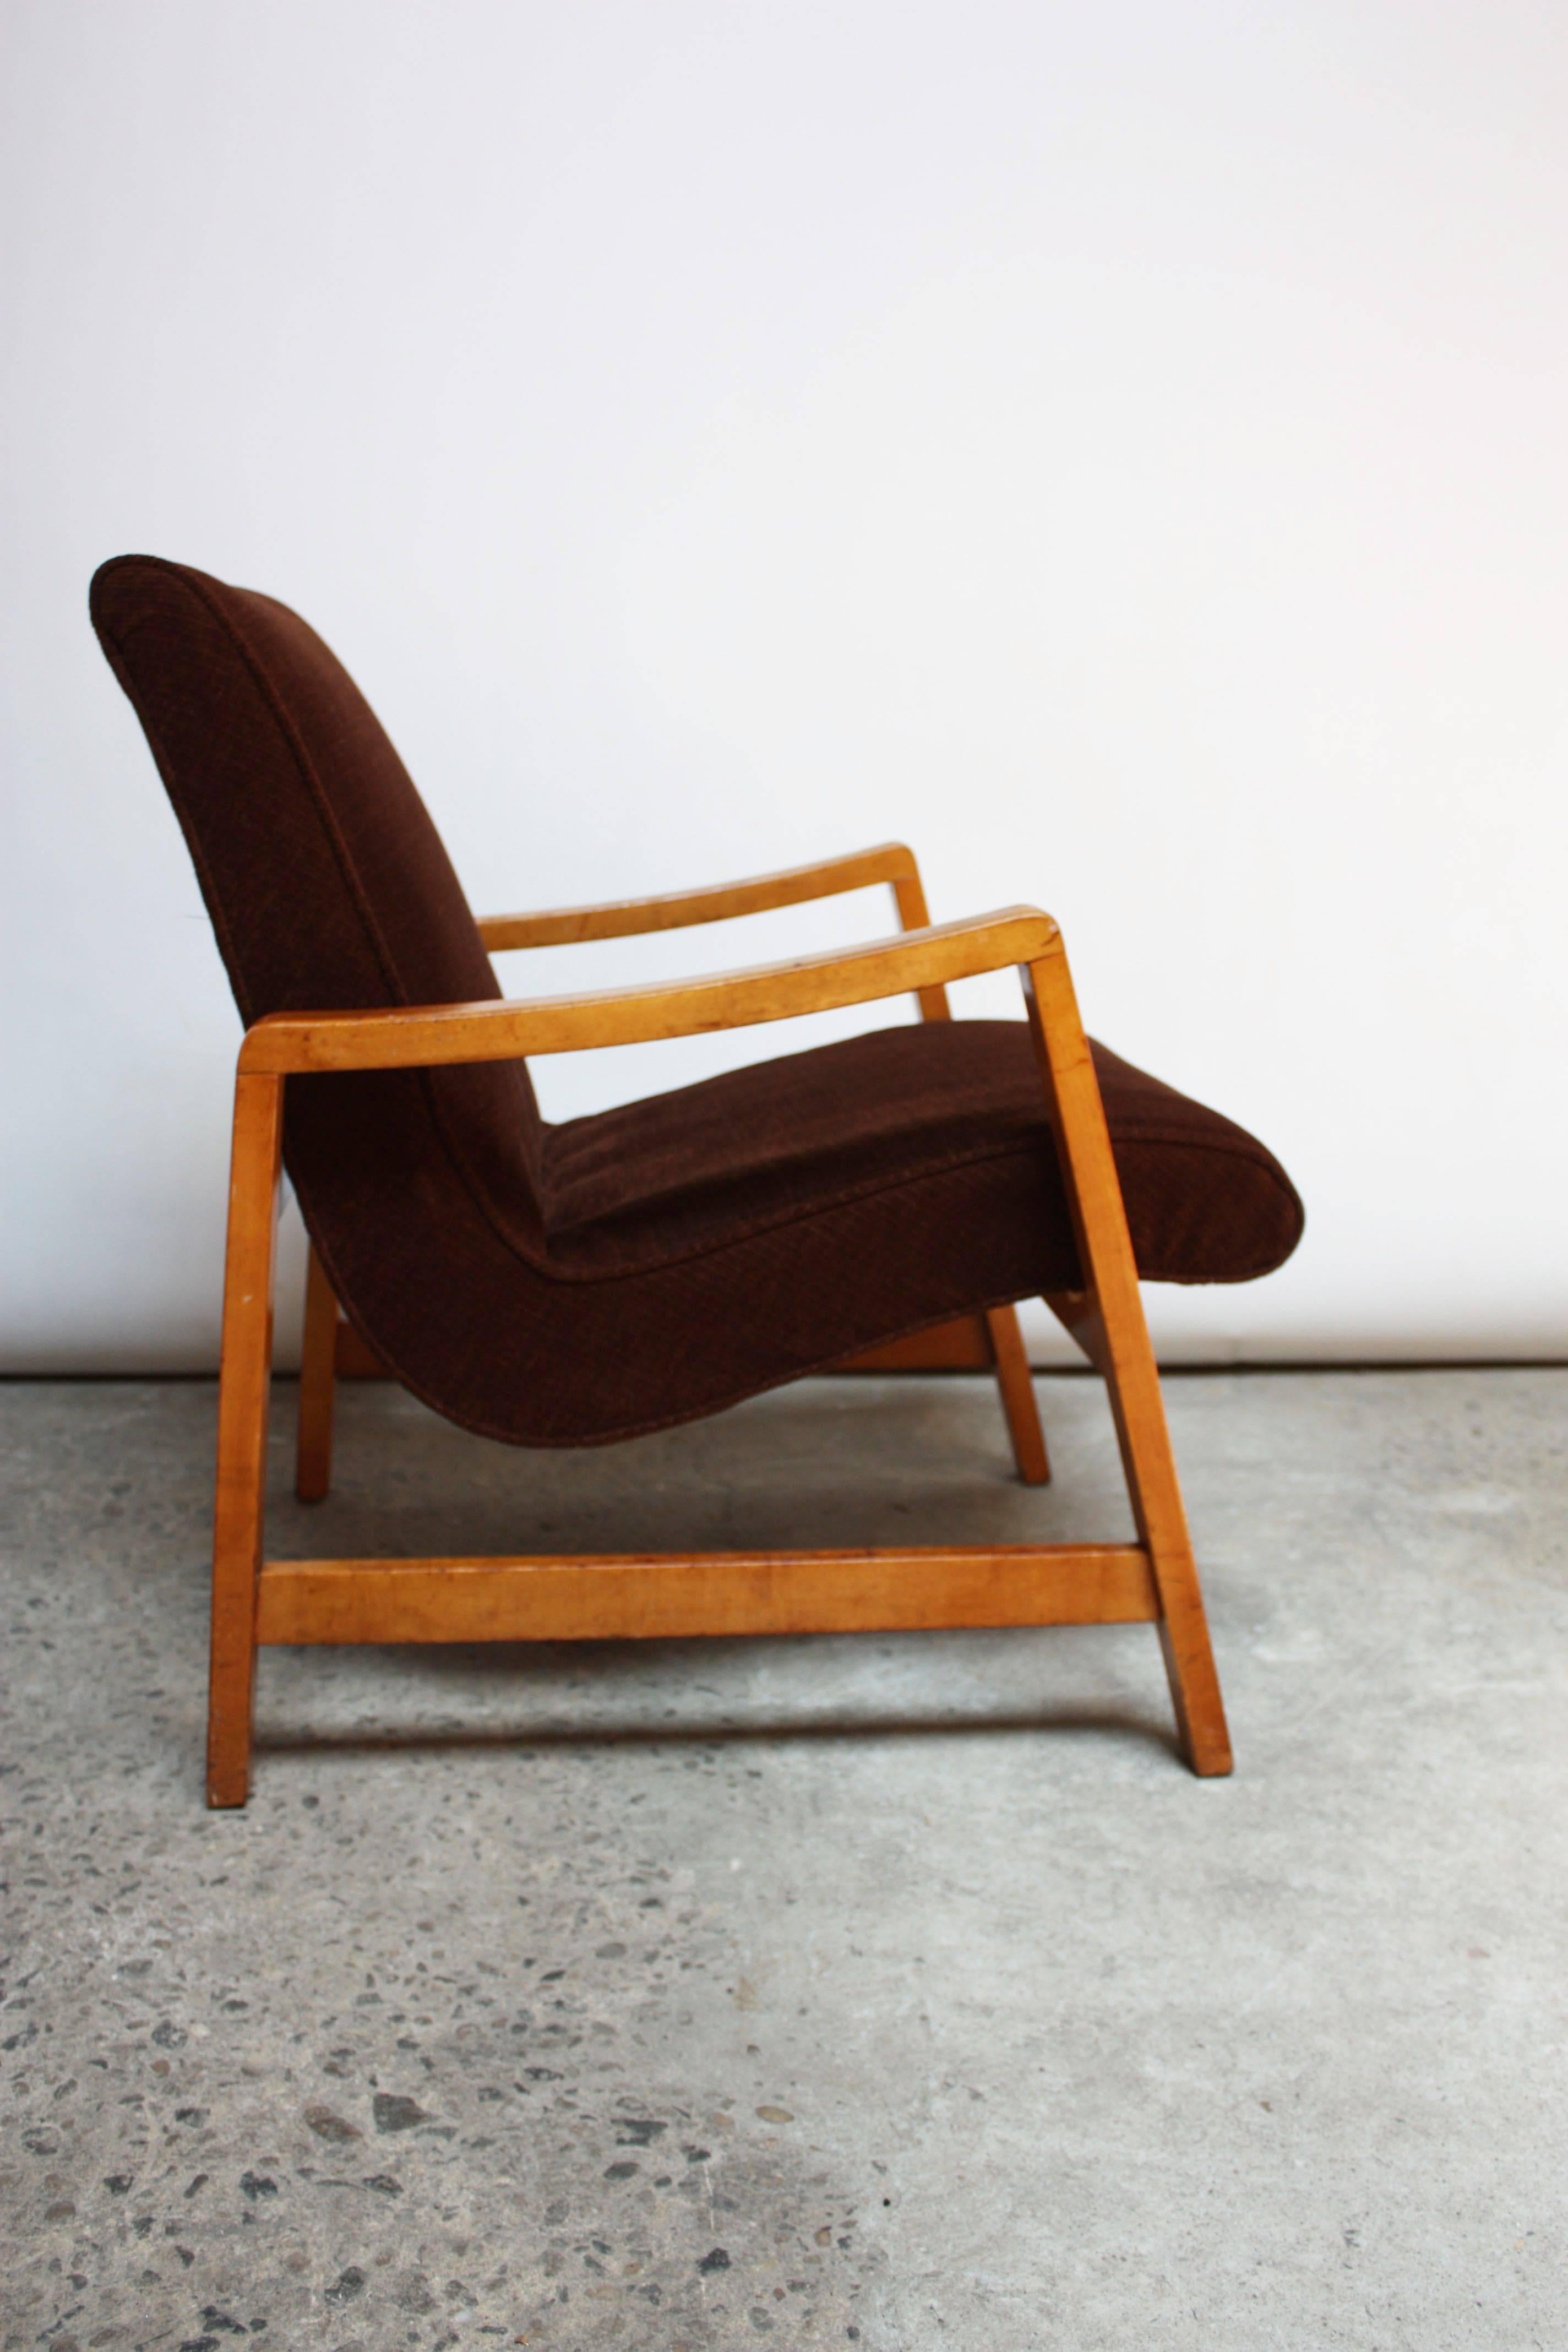 This armchair is an early example of Jens Risom's design for Knoll and is a simple yet innovative design. The chair is two separate pieces: a singular seat / back component is simply inserted directly into a frame supported by a series of inset